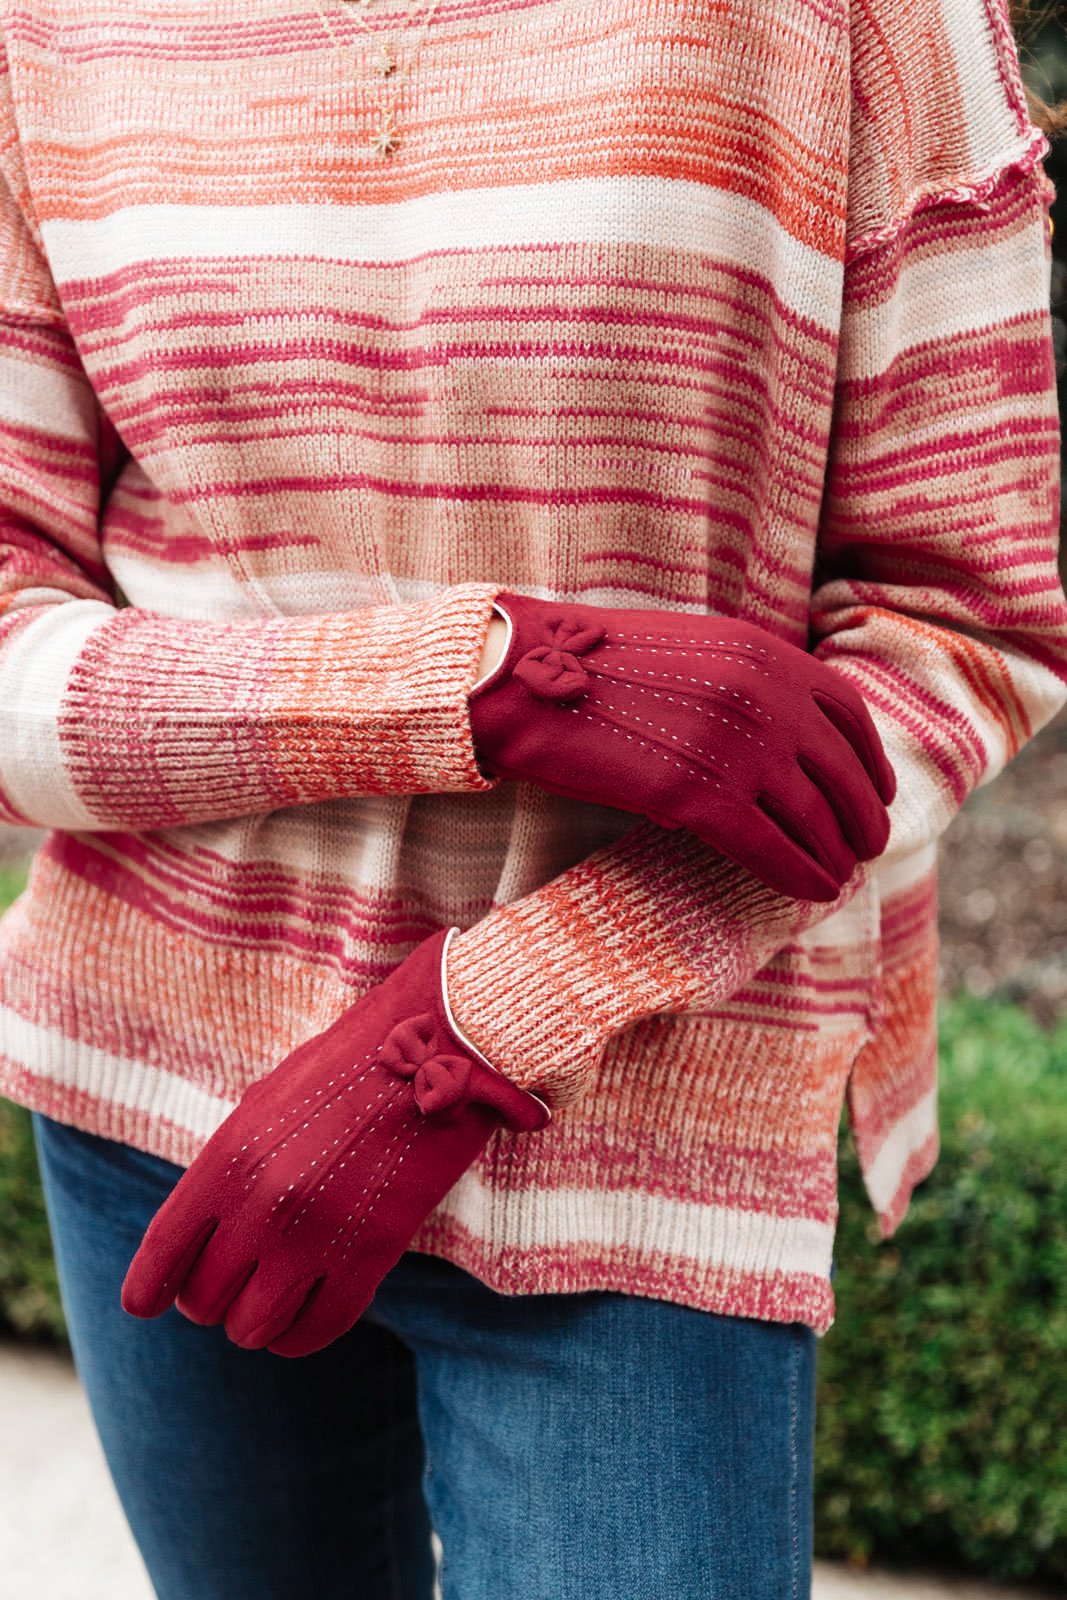 It's A Wonderful Life Gloves in Burgundy